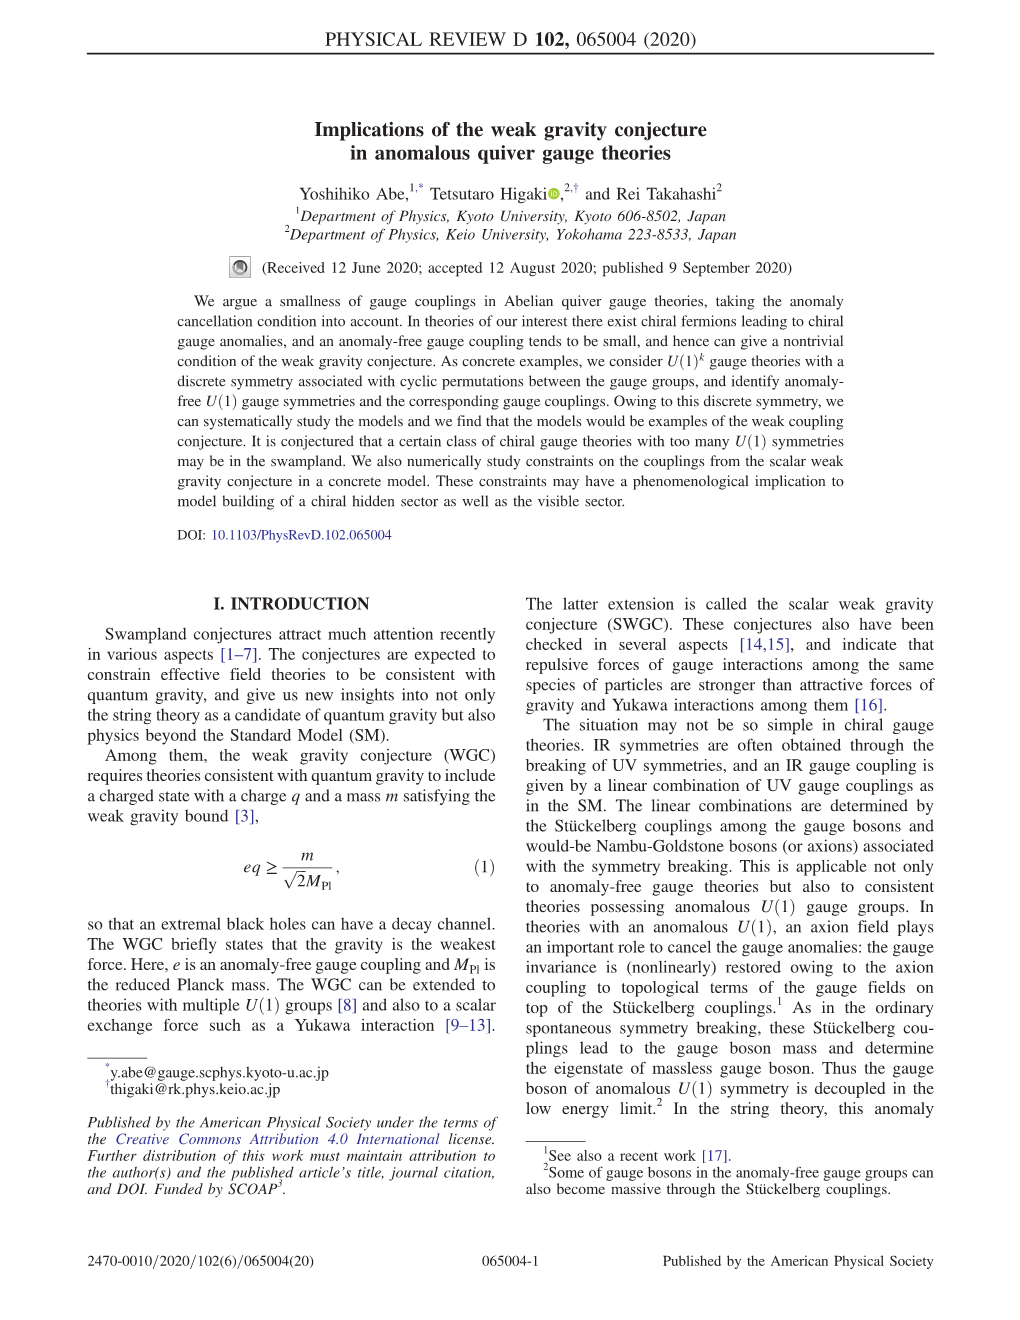 Implications of the Weak Gravity Conjecture in Anomalous Quiver Gauge Theories